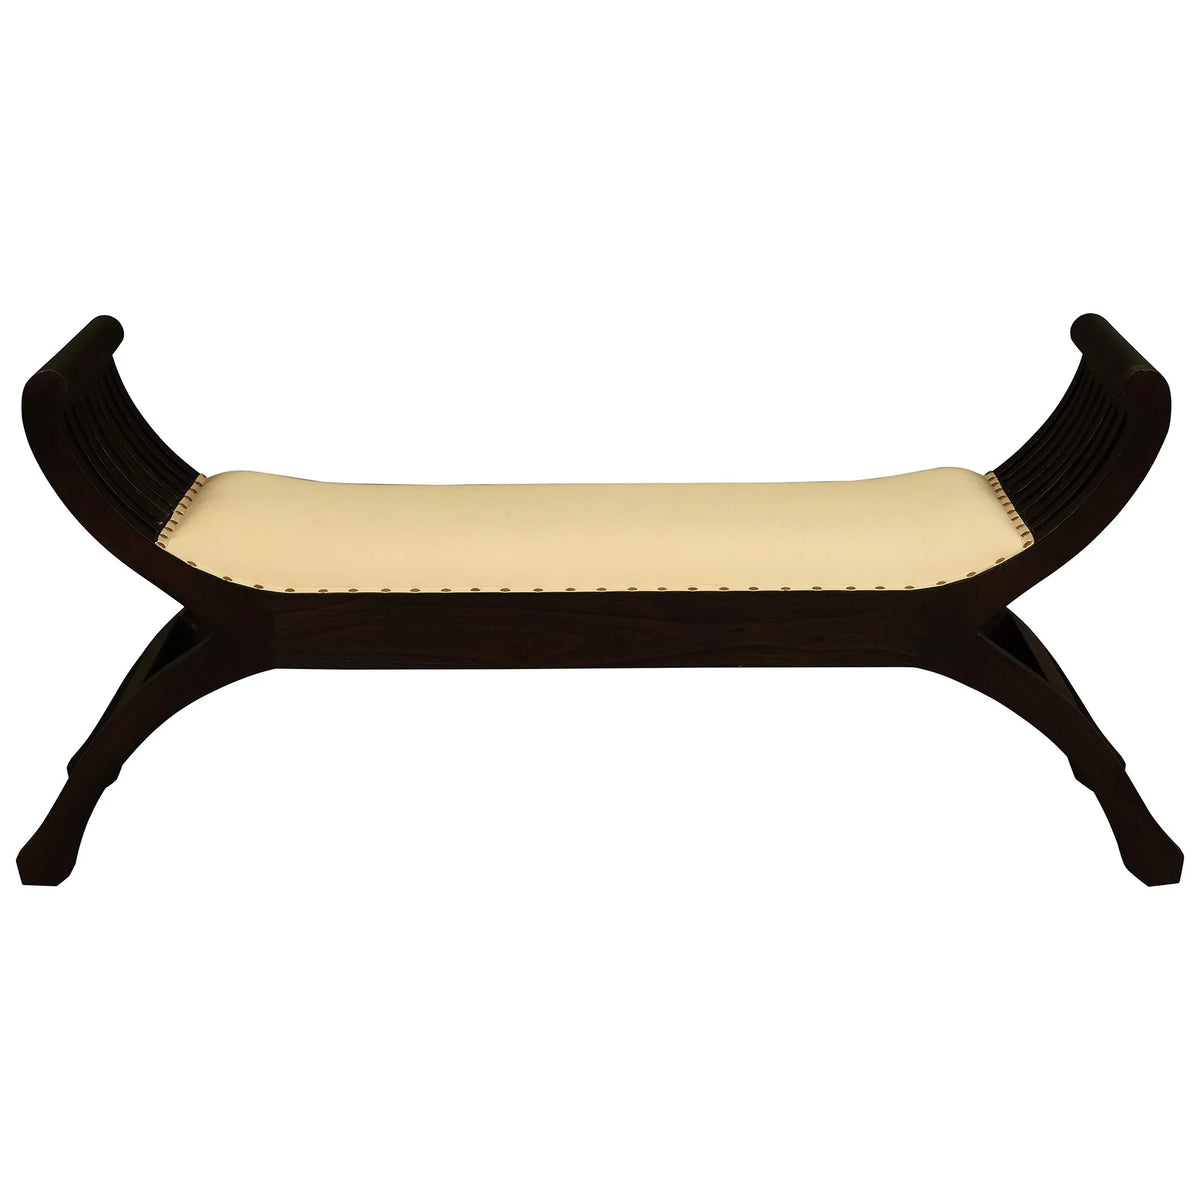 Upholstered Mahogany Timber Curved Bench with Cushioned Seat in Chocolate- 130cm - Notbrand